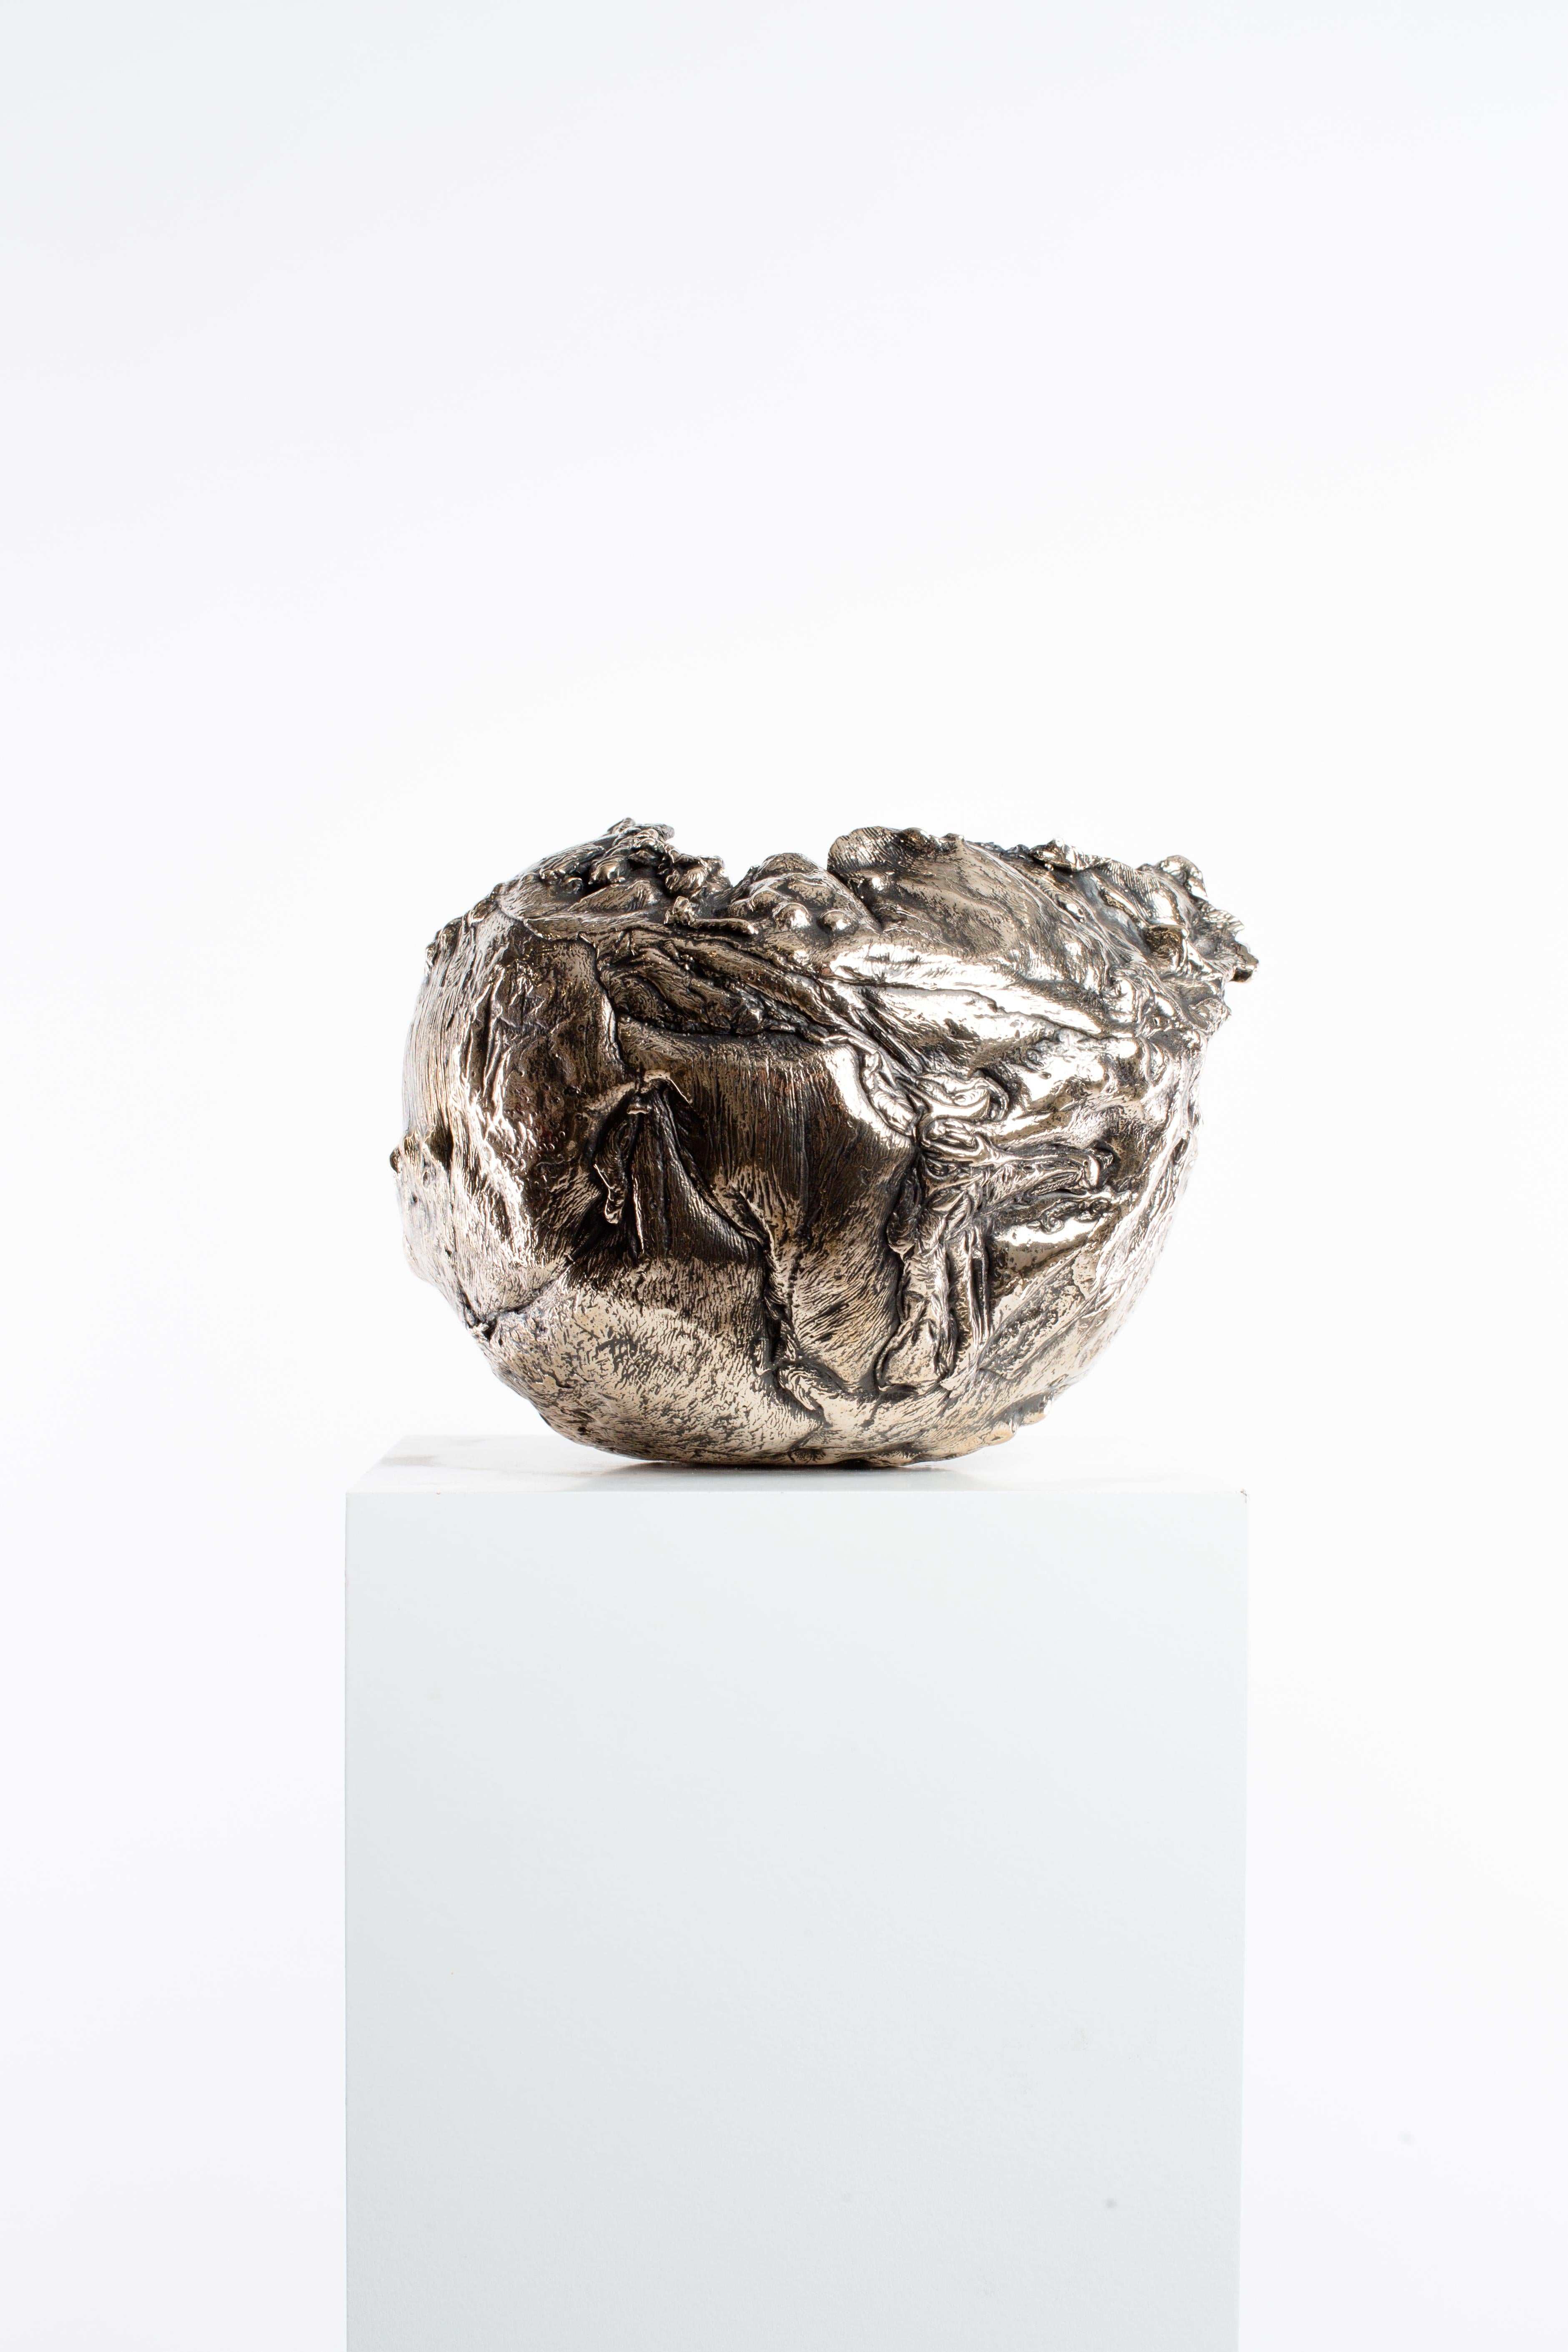 Polished, Bronze, Patina, Abstract, Contemporary, Modern, Sculpture, Vessel 1